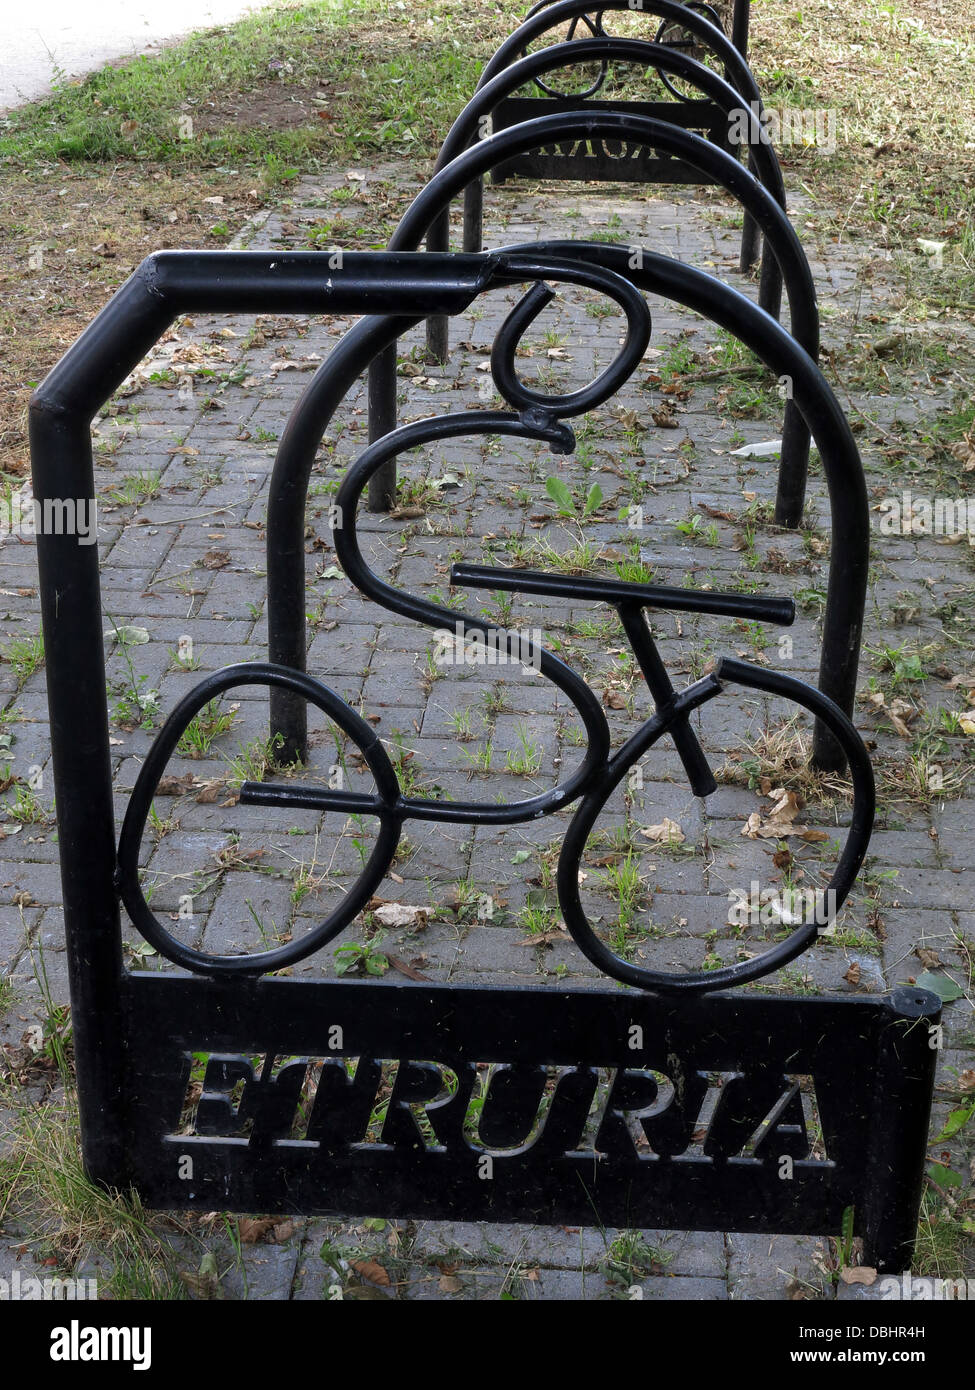 Welcome to Etruria, a great place to visit the canal or park up your bike . Stoke on Trent , Staffordshire , England , GB Stock Photo